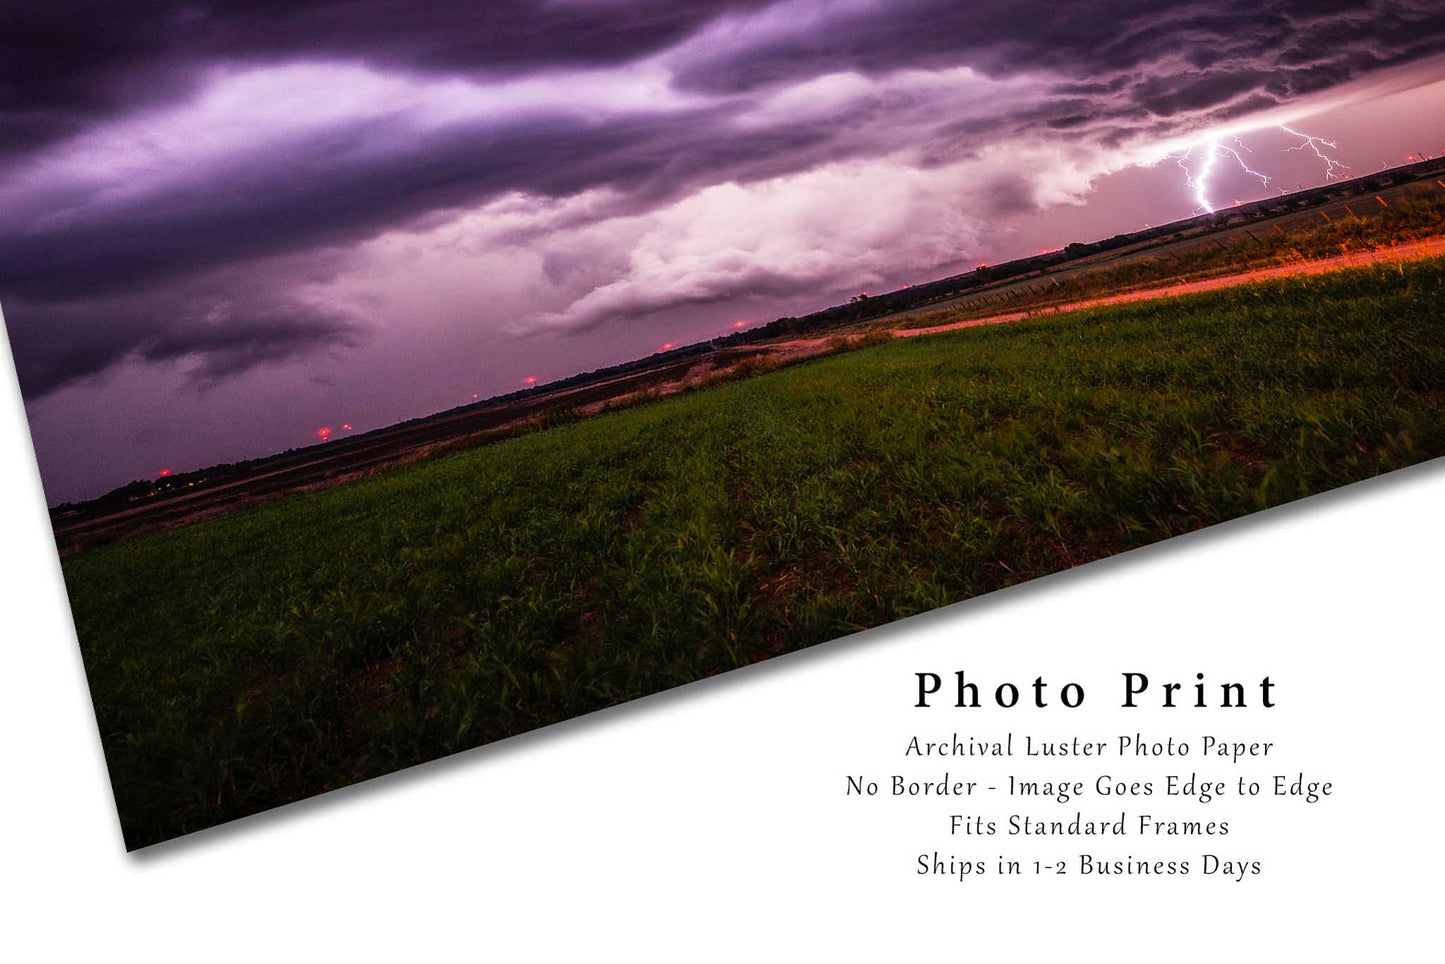 Storm Photography Print - Wall Art Picture of Lightning Strike on Stormy Night in Kansas Weather Landscape Artwork Decor 4x6 to 40x60